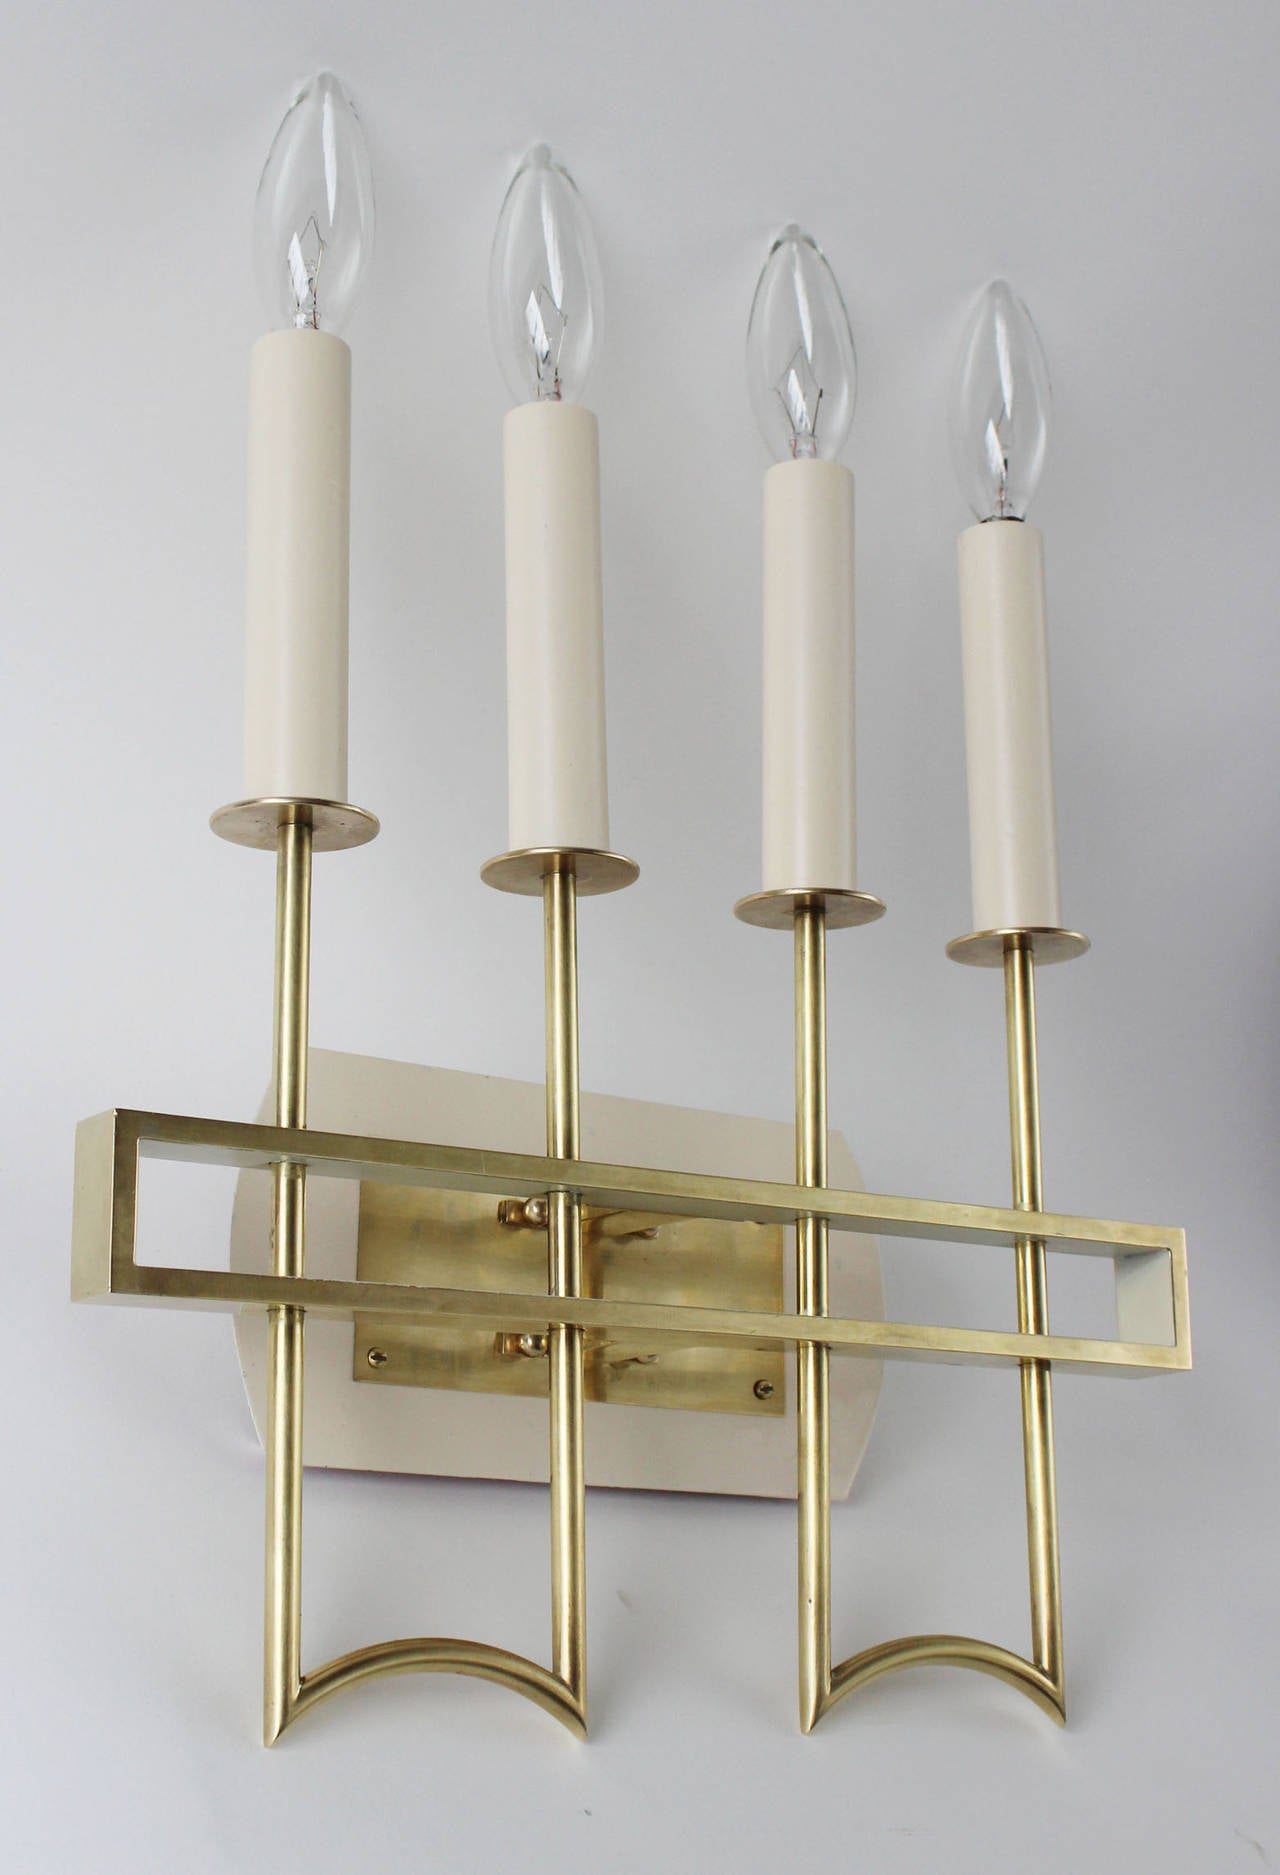 A beautiful pair of solid and tubular brass sconces with enameled wood candles, in the manner of Arredoluce.